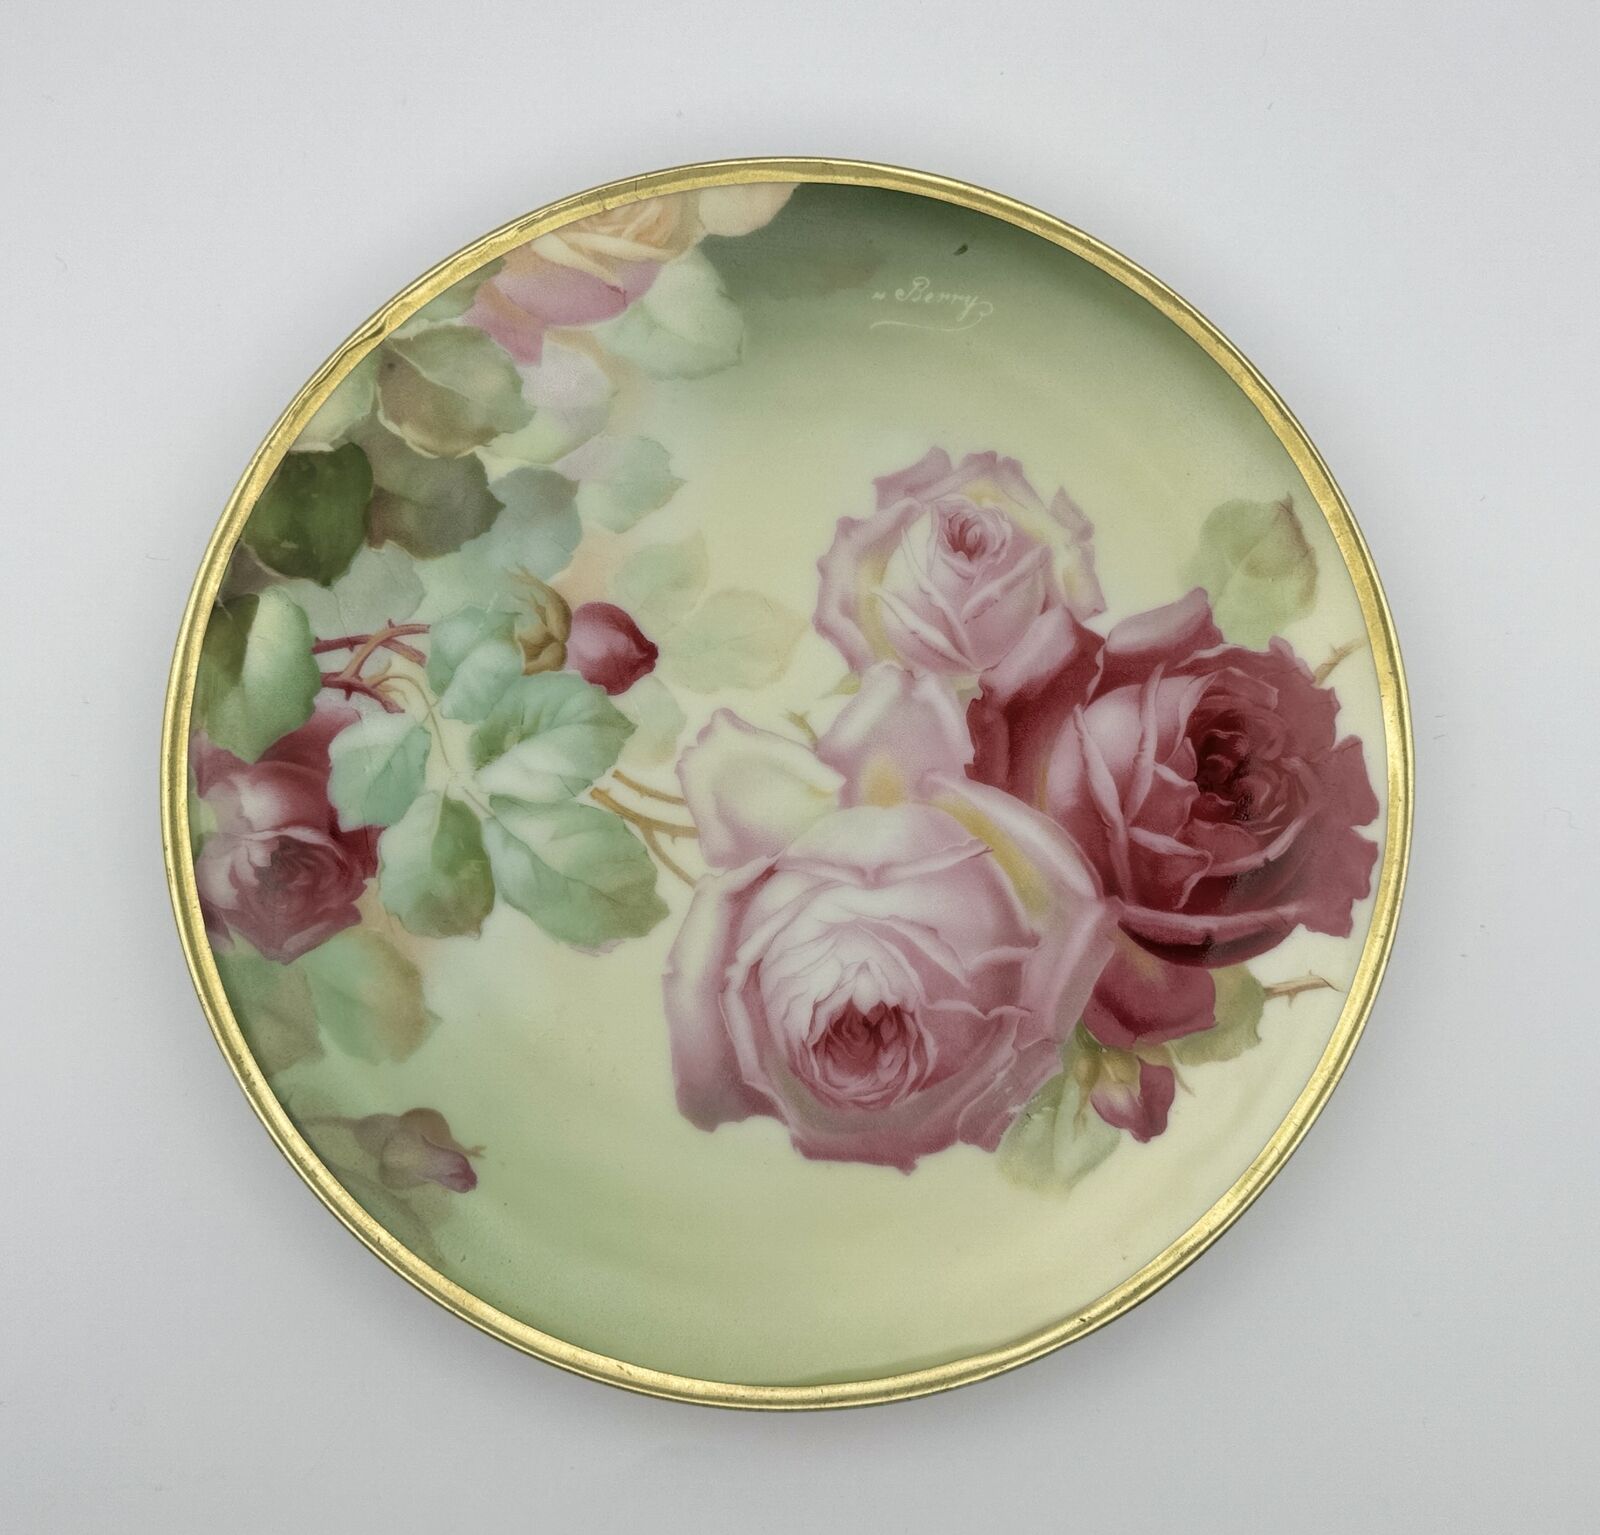 Thomas Bavaria Hand-Painted Pink Rose Porcelain Plate – Signed by Berry